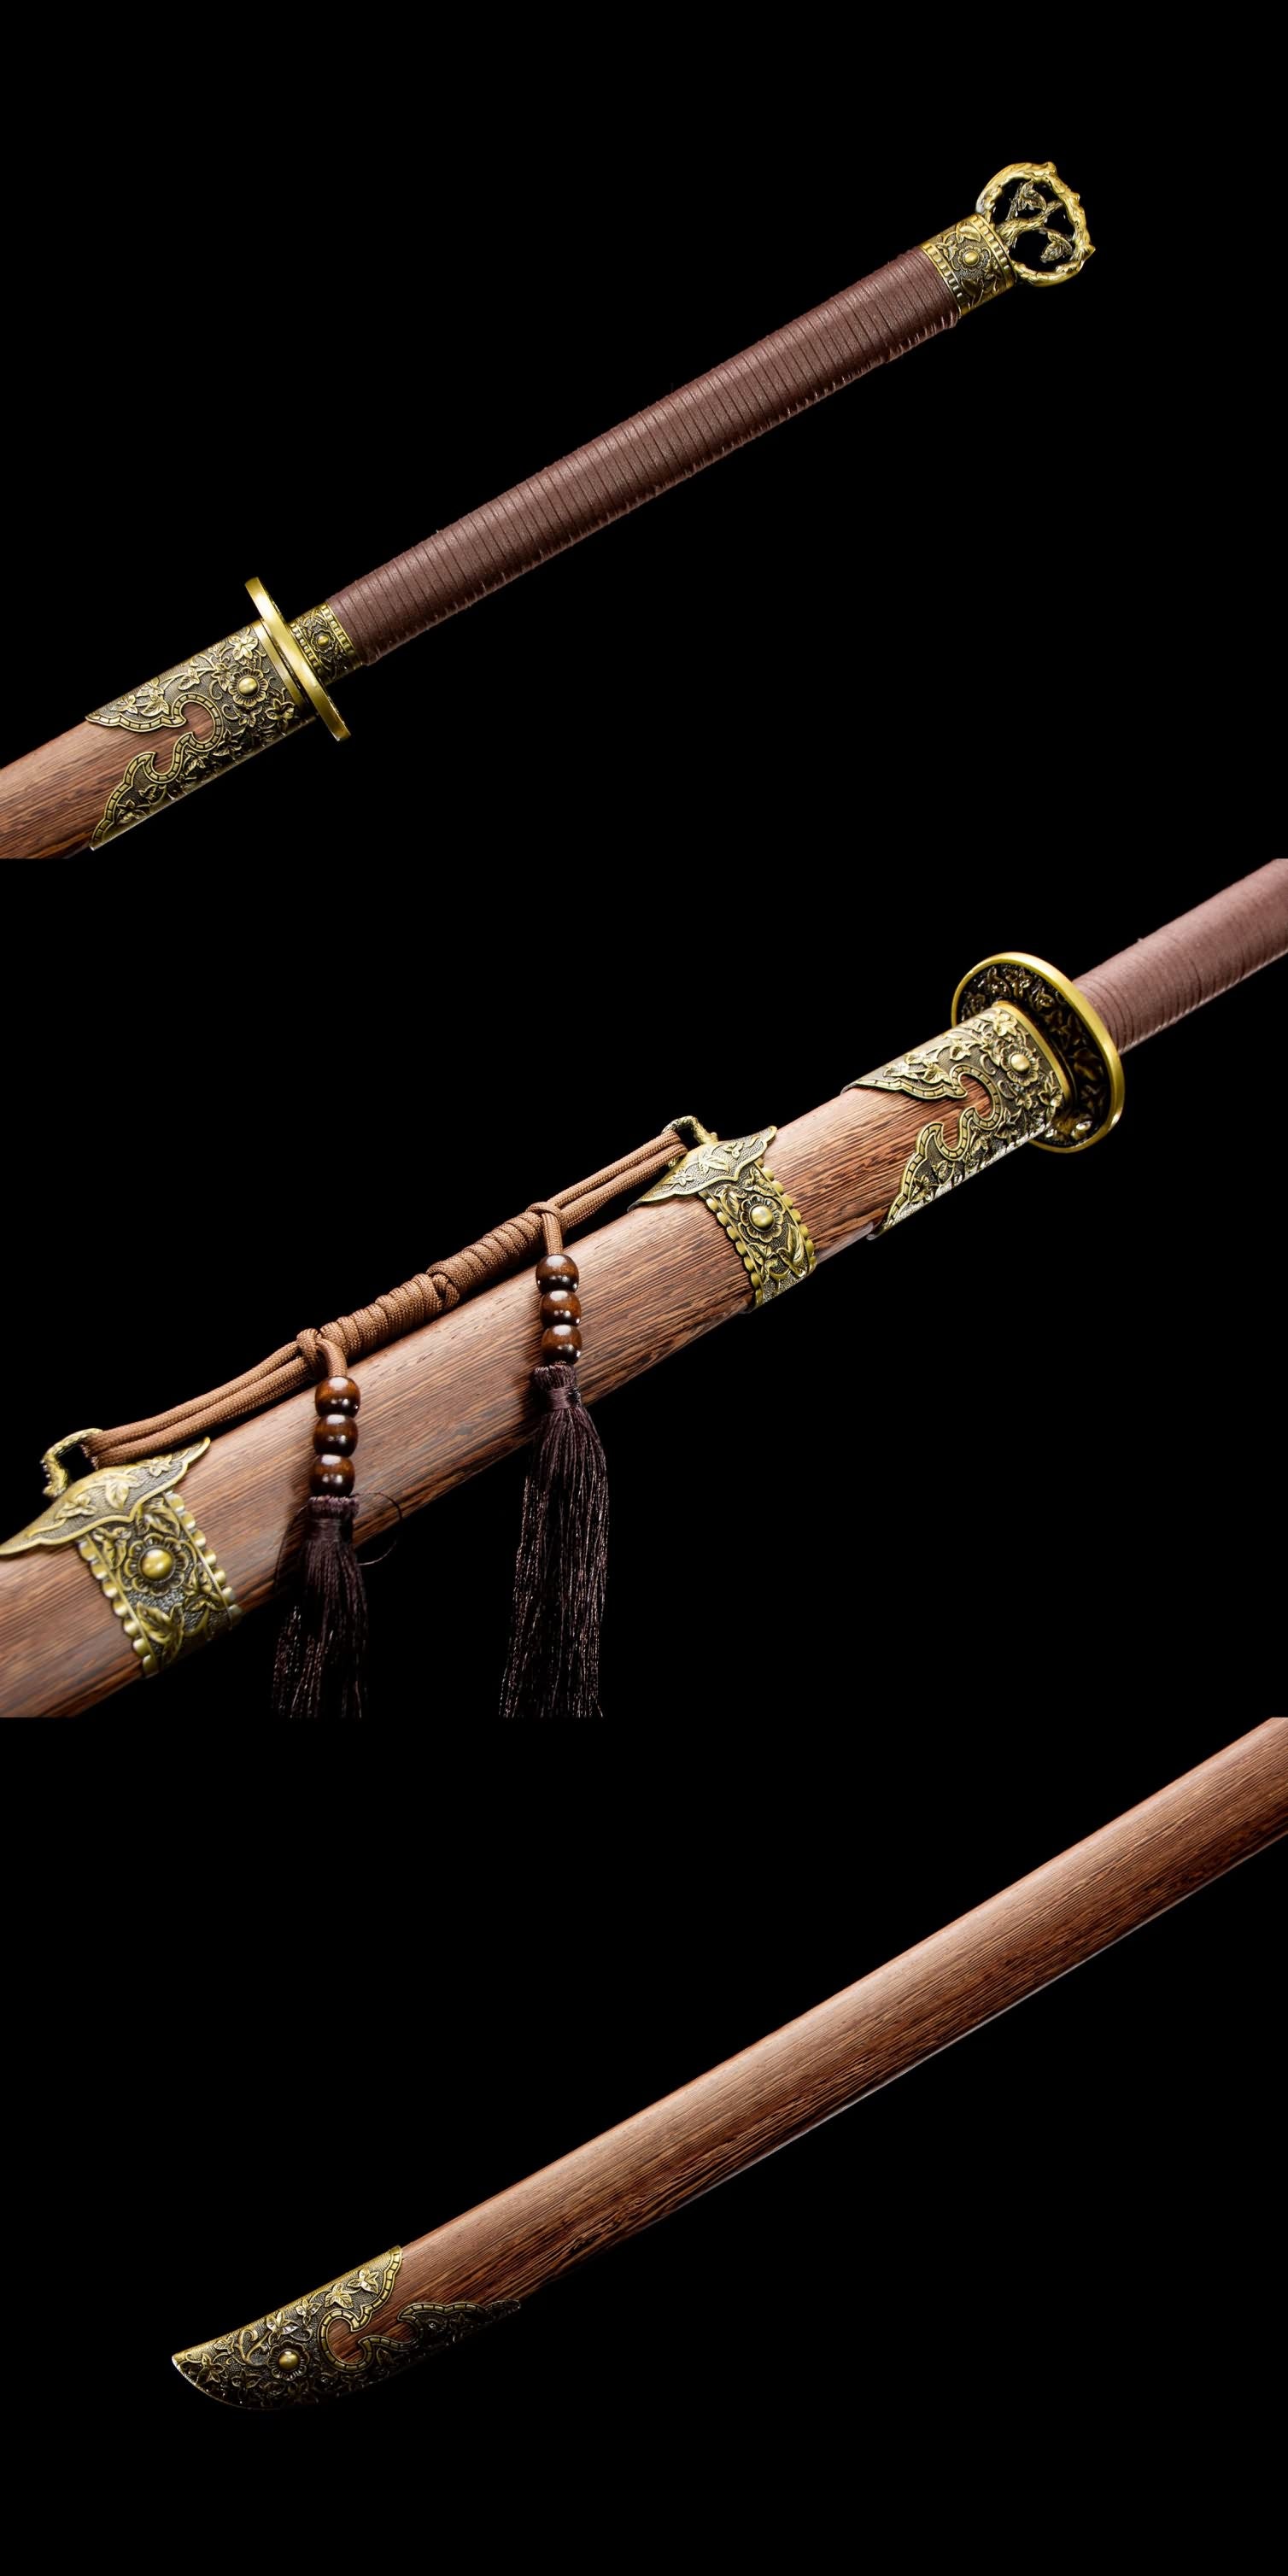 Miao Dao Traditional Forged Sword - High Manganese Steel Blade, Rosewood Scabbard